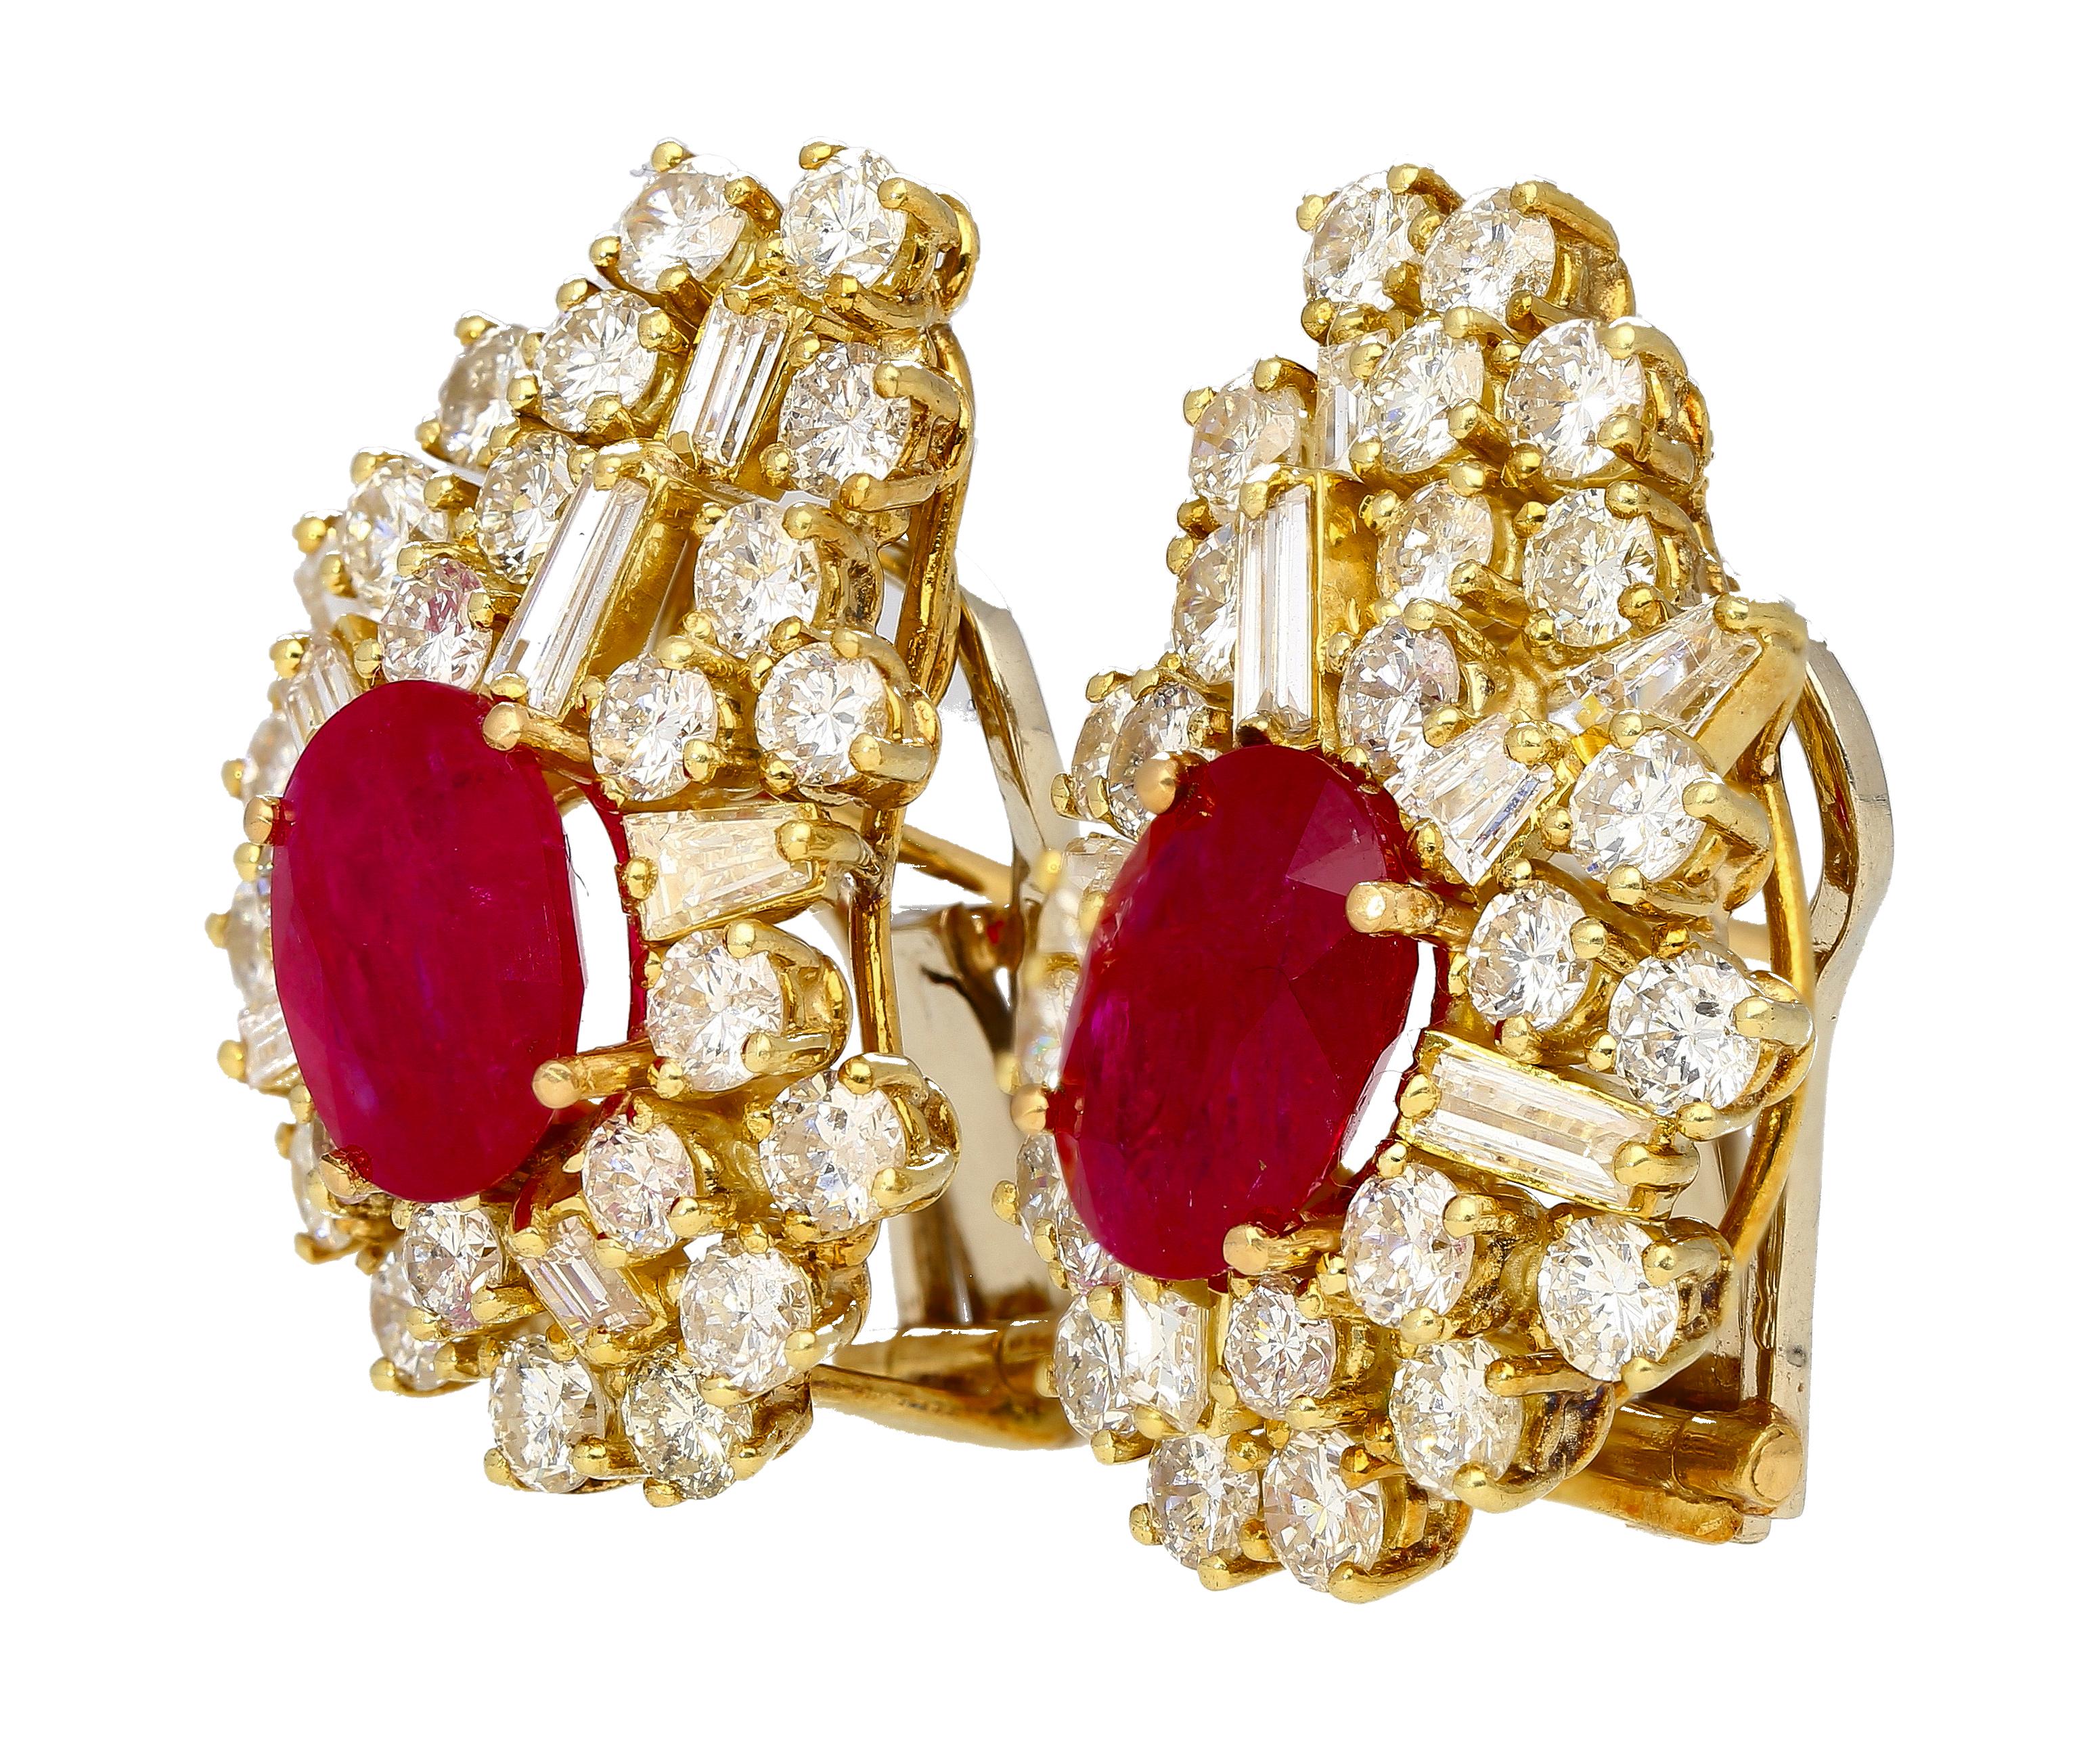 Vintage 4.5 Carat Ruby & Diamond Cluster Clip On Earrings in 18K Yellow Gold In Excellent Condition For Sale In Miami, FL